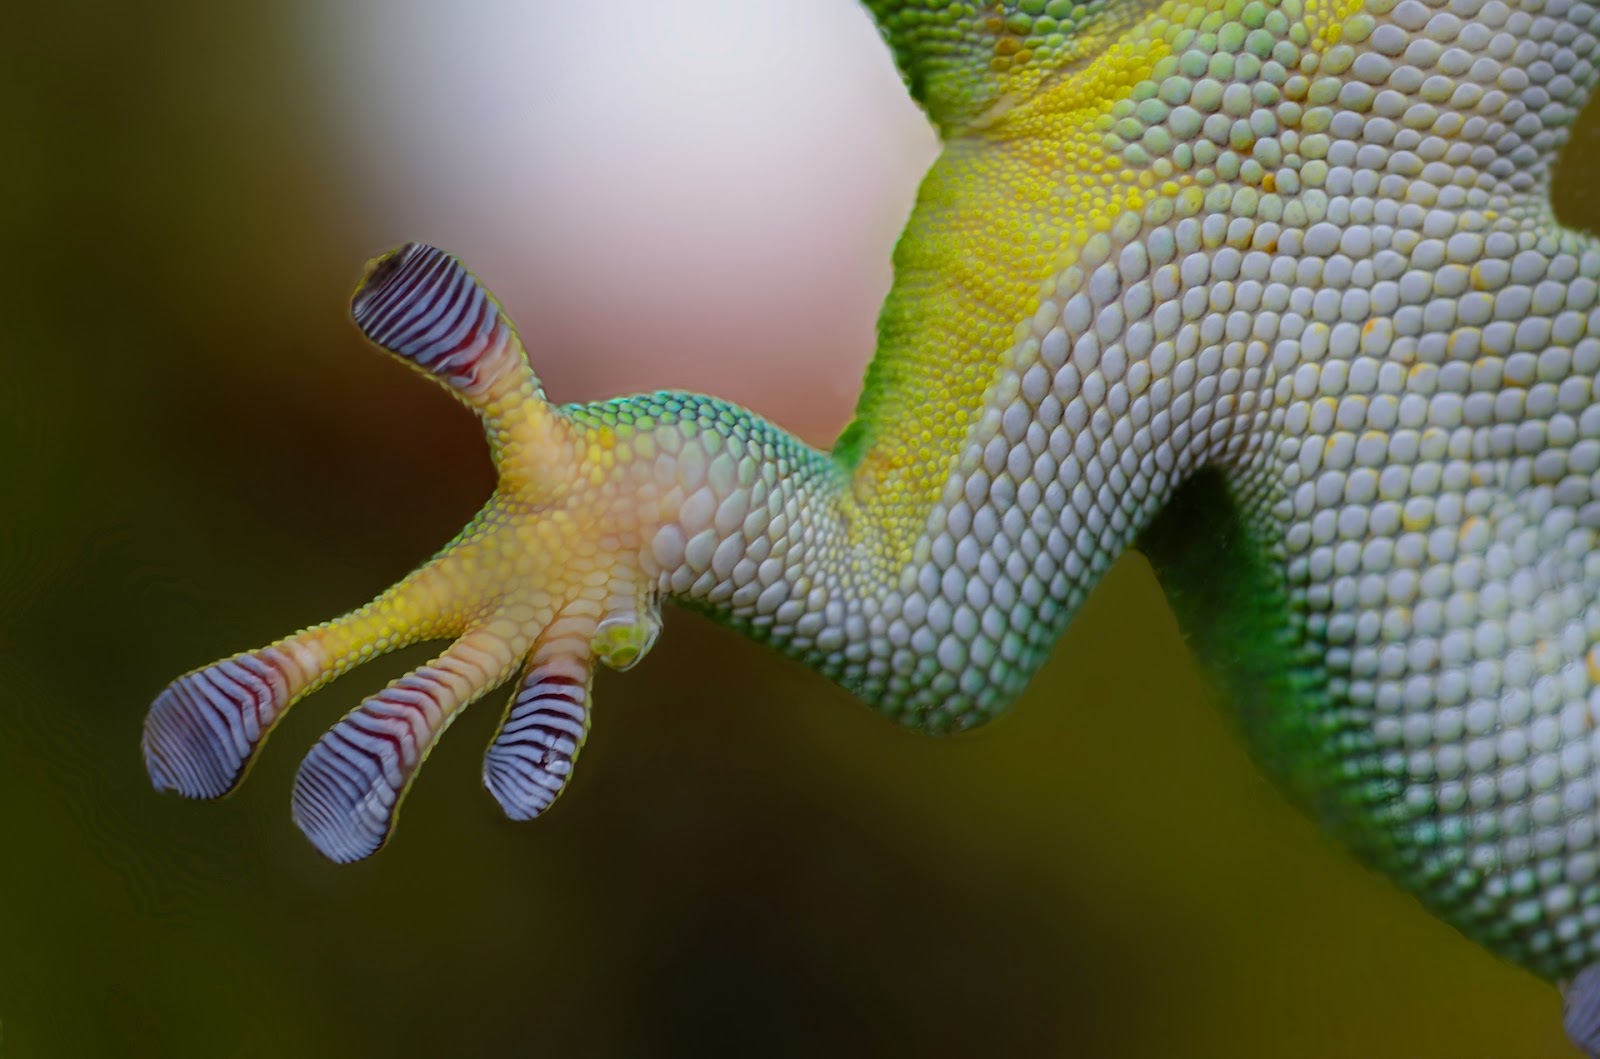 Gecko hand pressed against glass